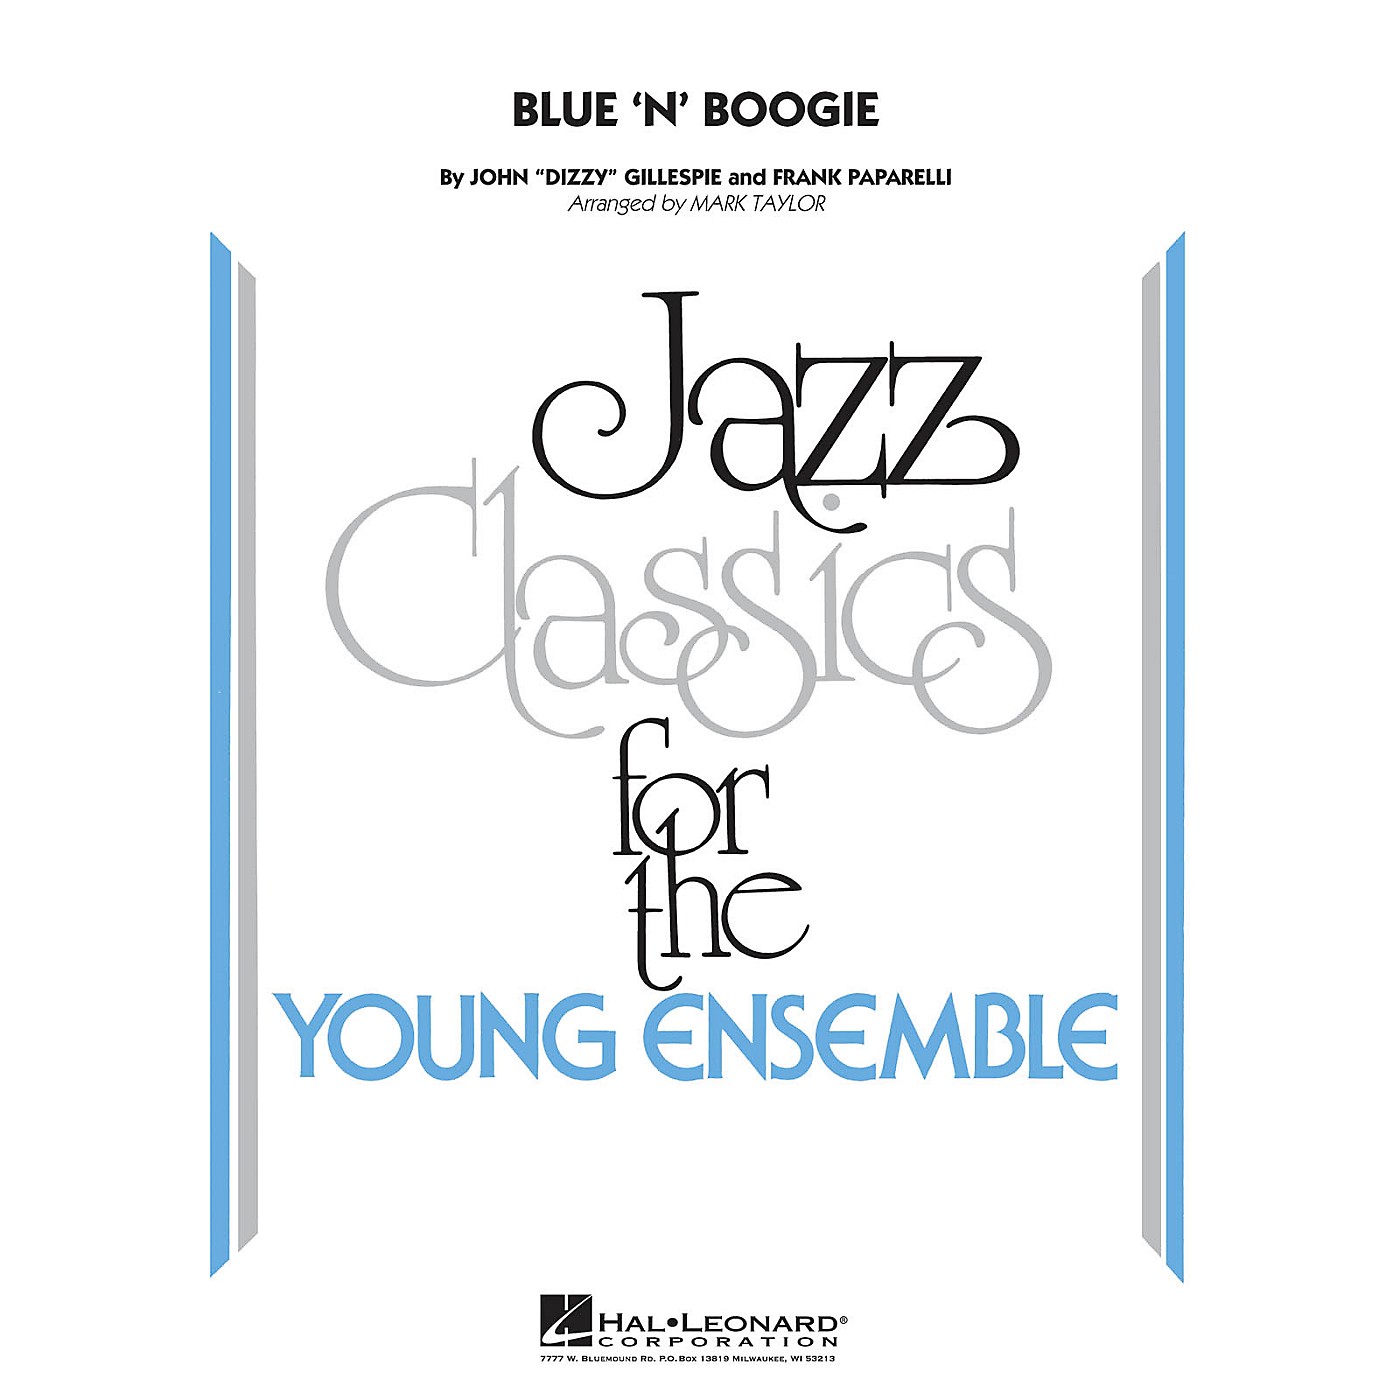 Hal Leonard Blue 'N' Boogie Jazz Band Level 3 by Dizzy Gillespie Arranged by Mark Taylor thumbnail